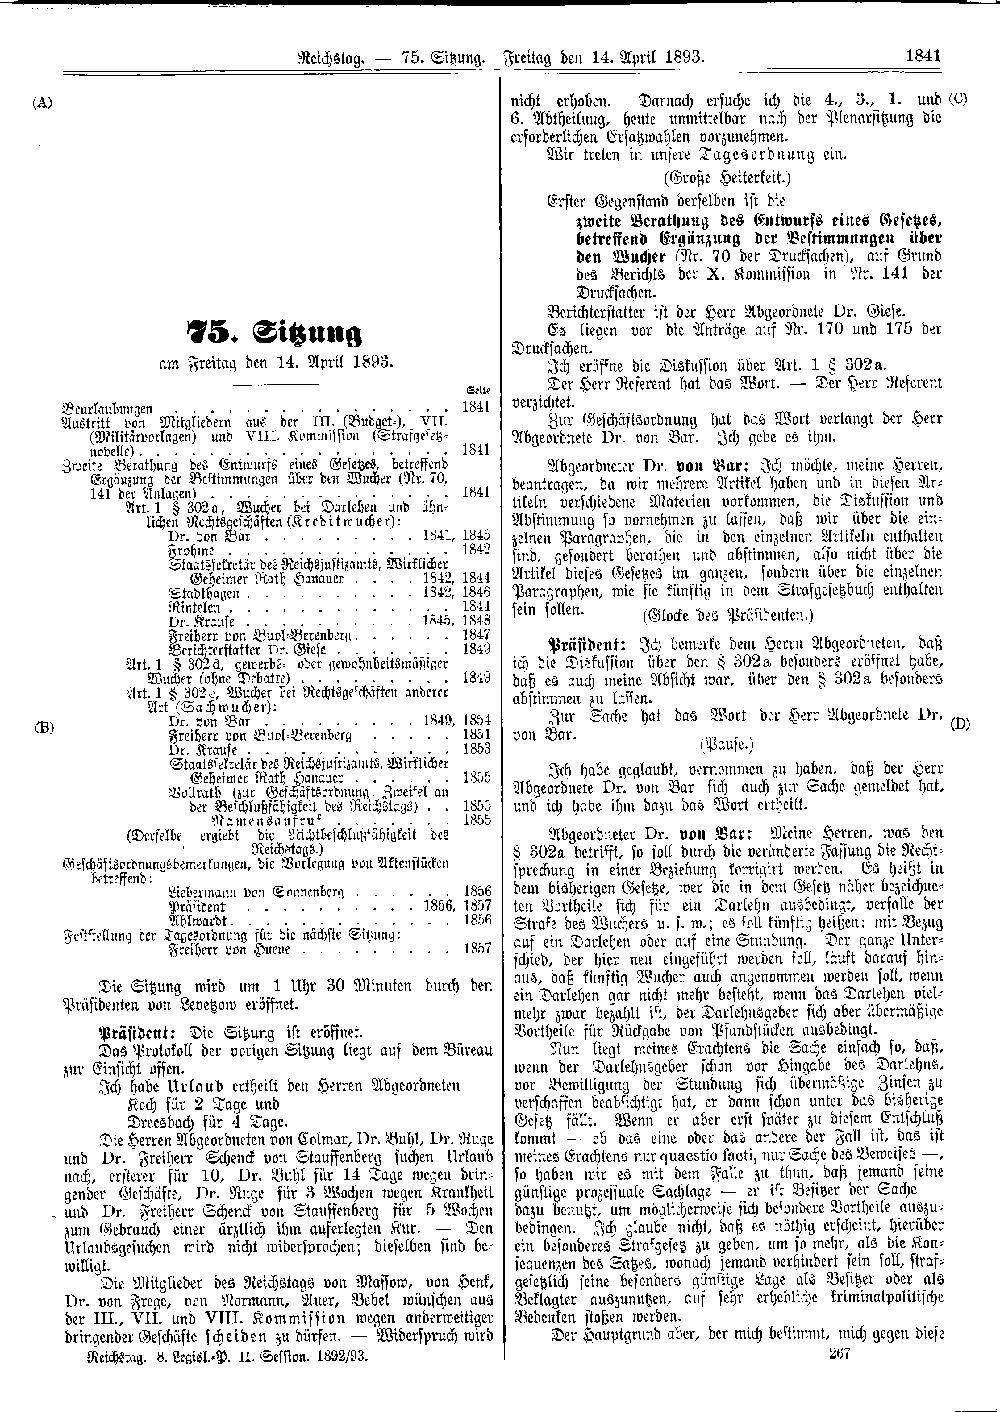 Scan of page 1841